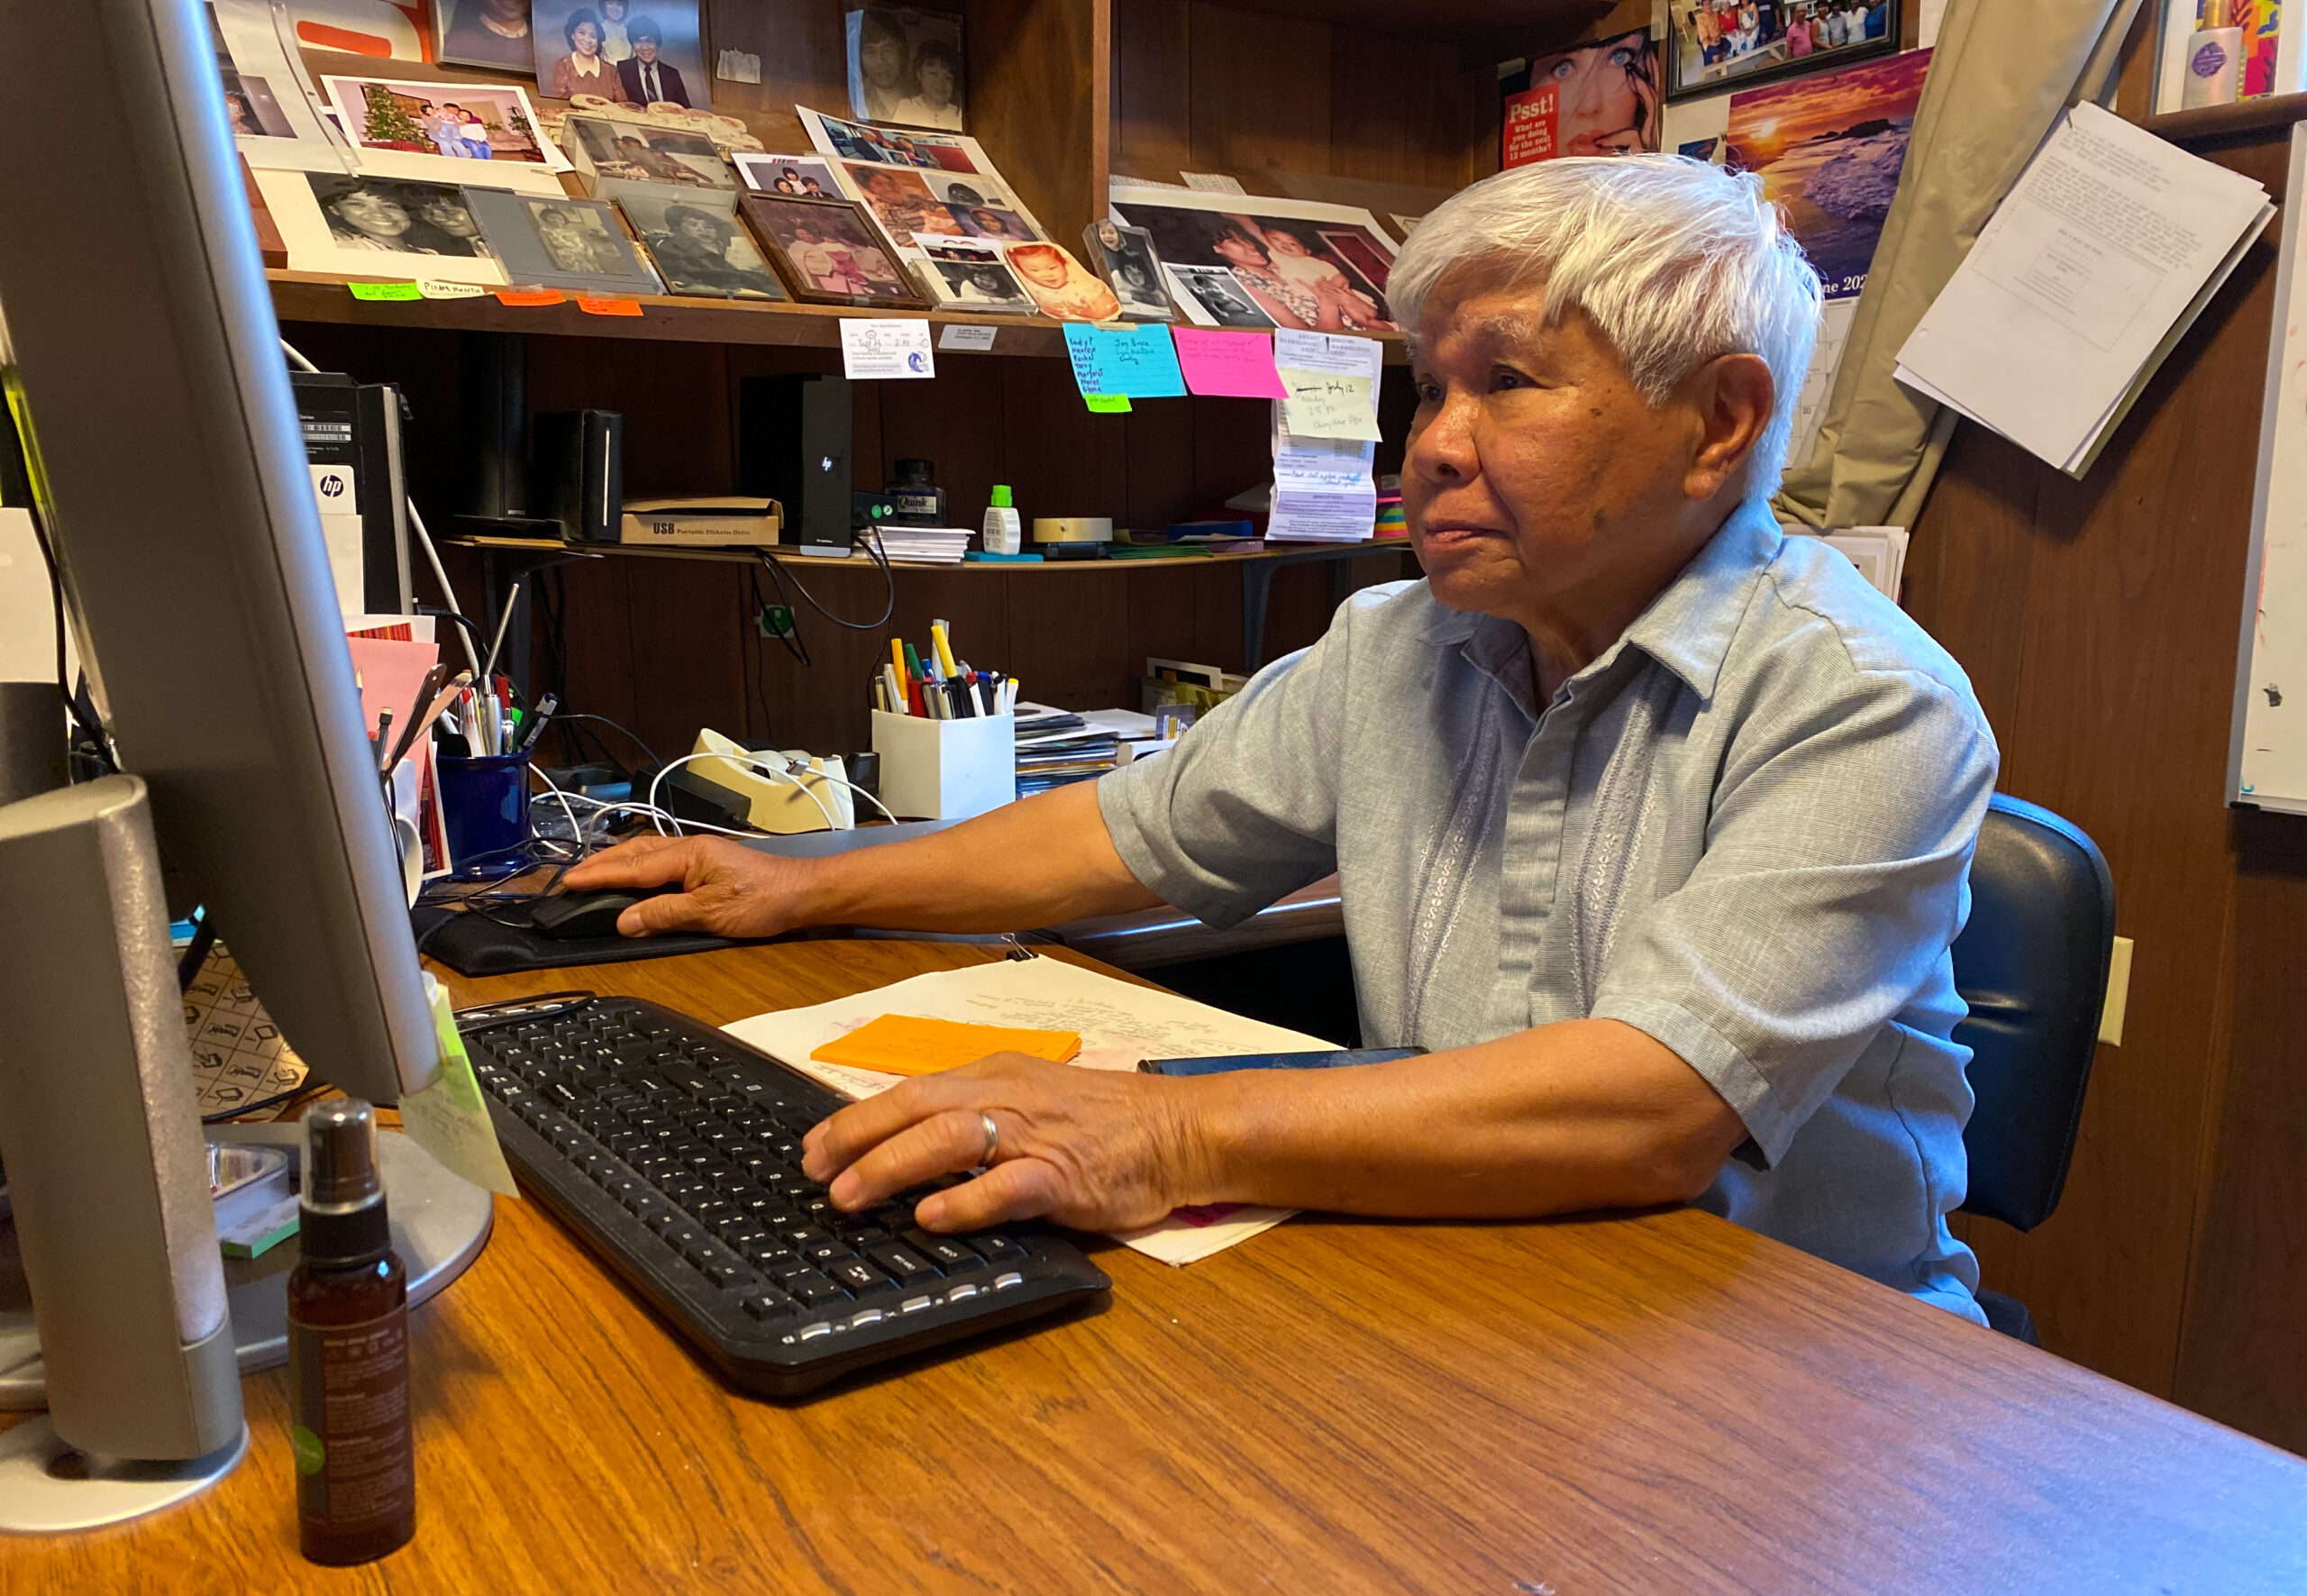 Photo of Jon Melegrito, former editor in chief of Manila Mail, sitting in front of a computer in his office